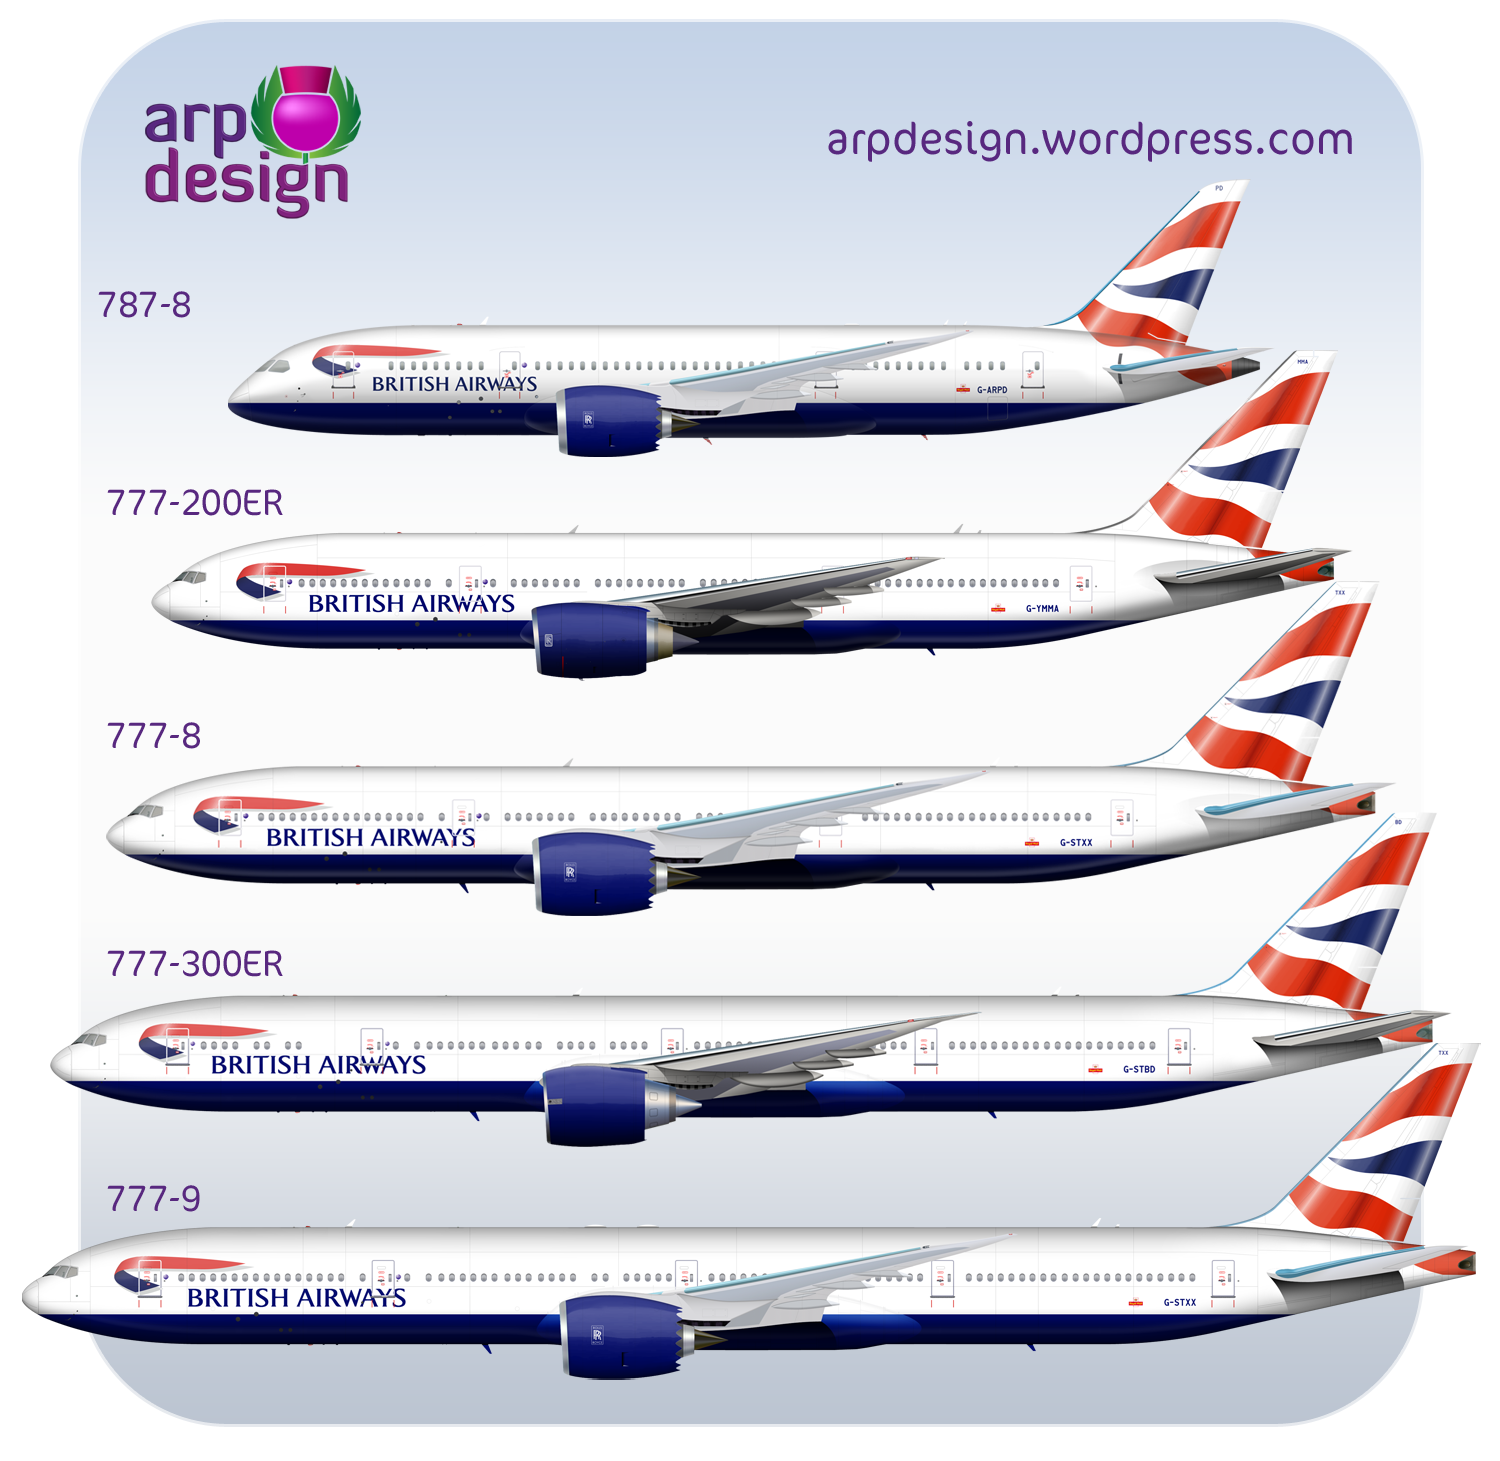 What is the difference between Boeing 777-9 and 777-300ER?